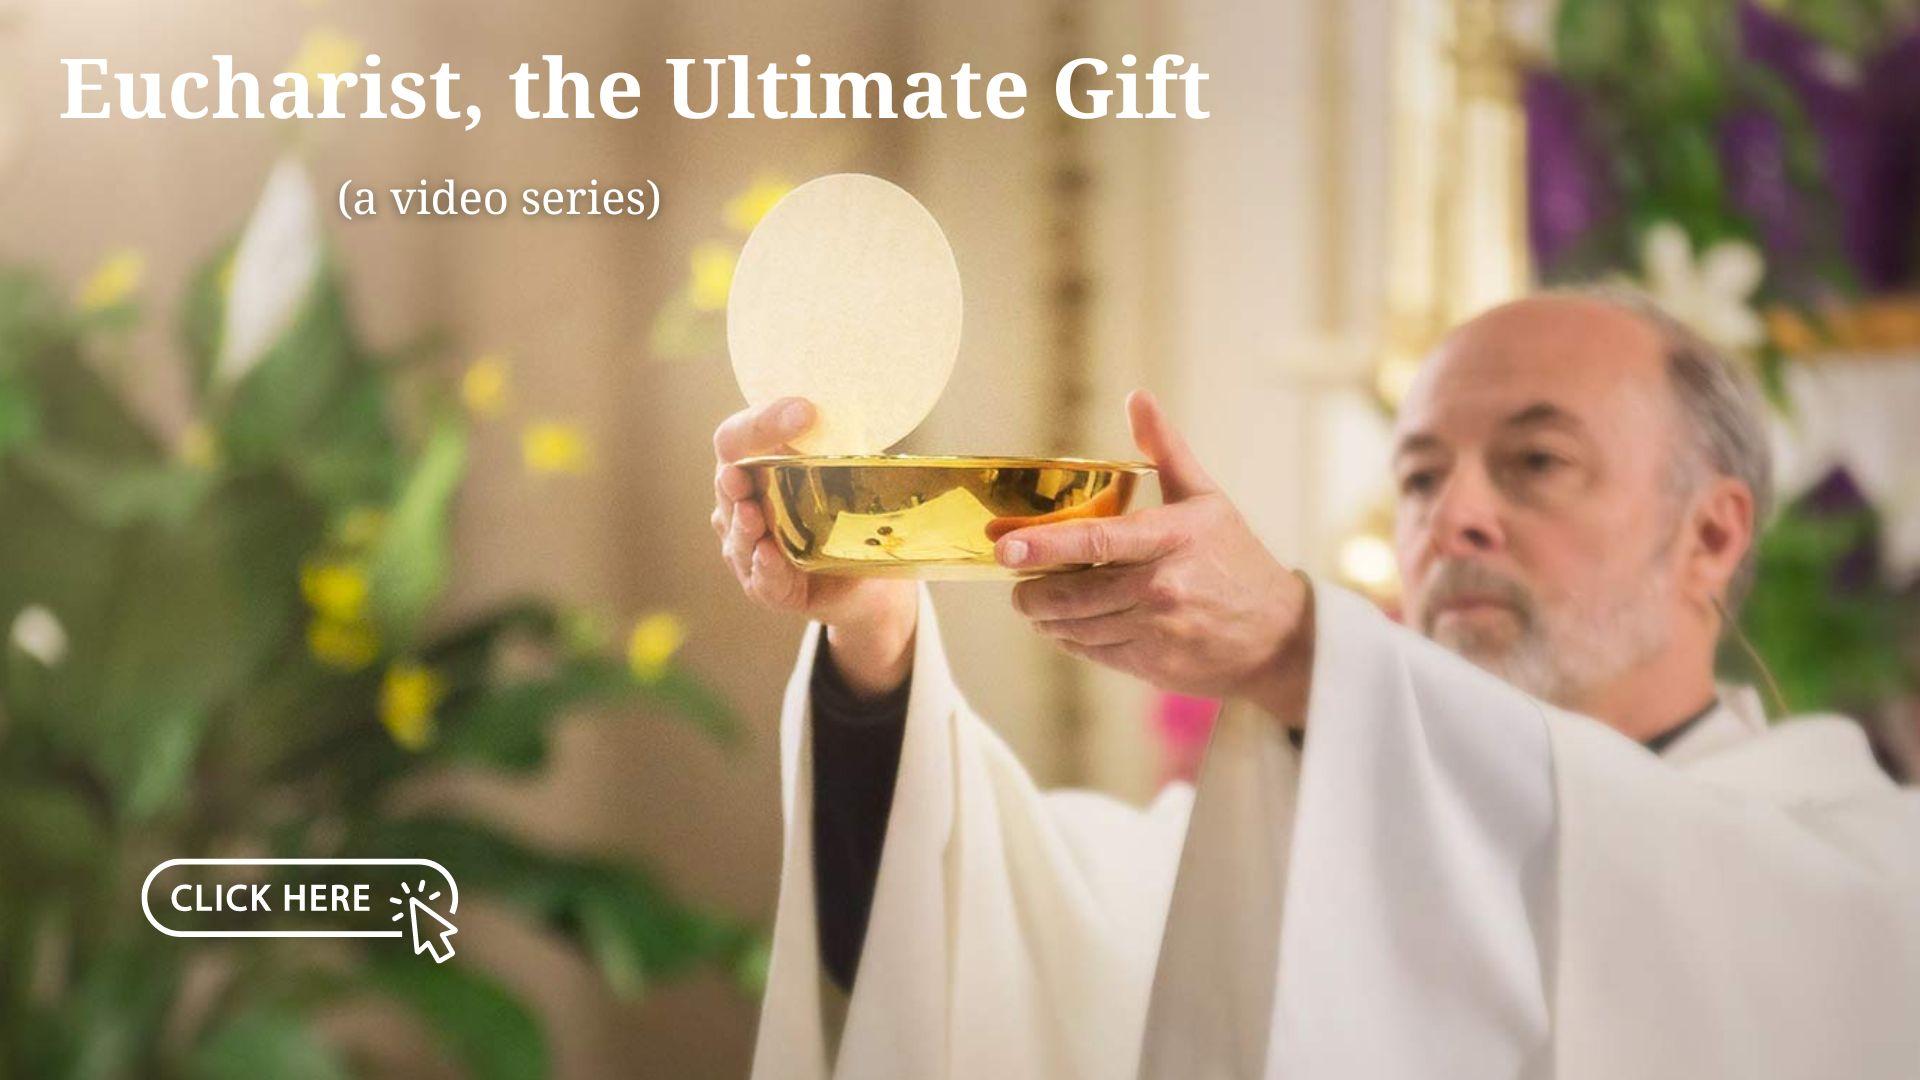 Eucharist, the Ultimate Gift